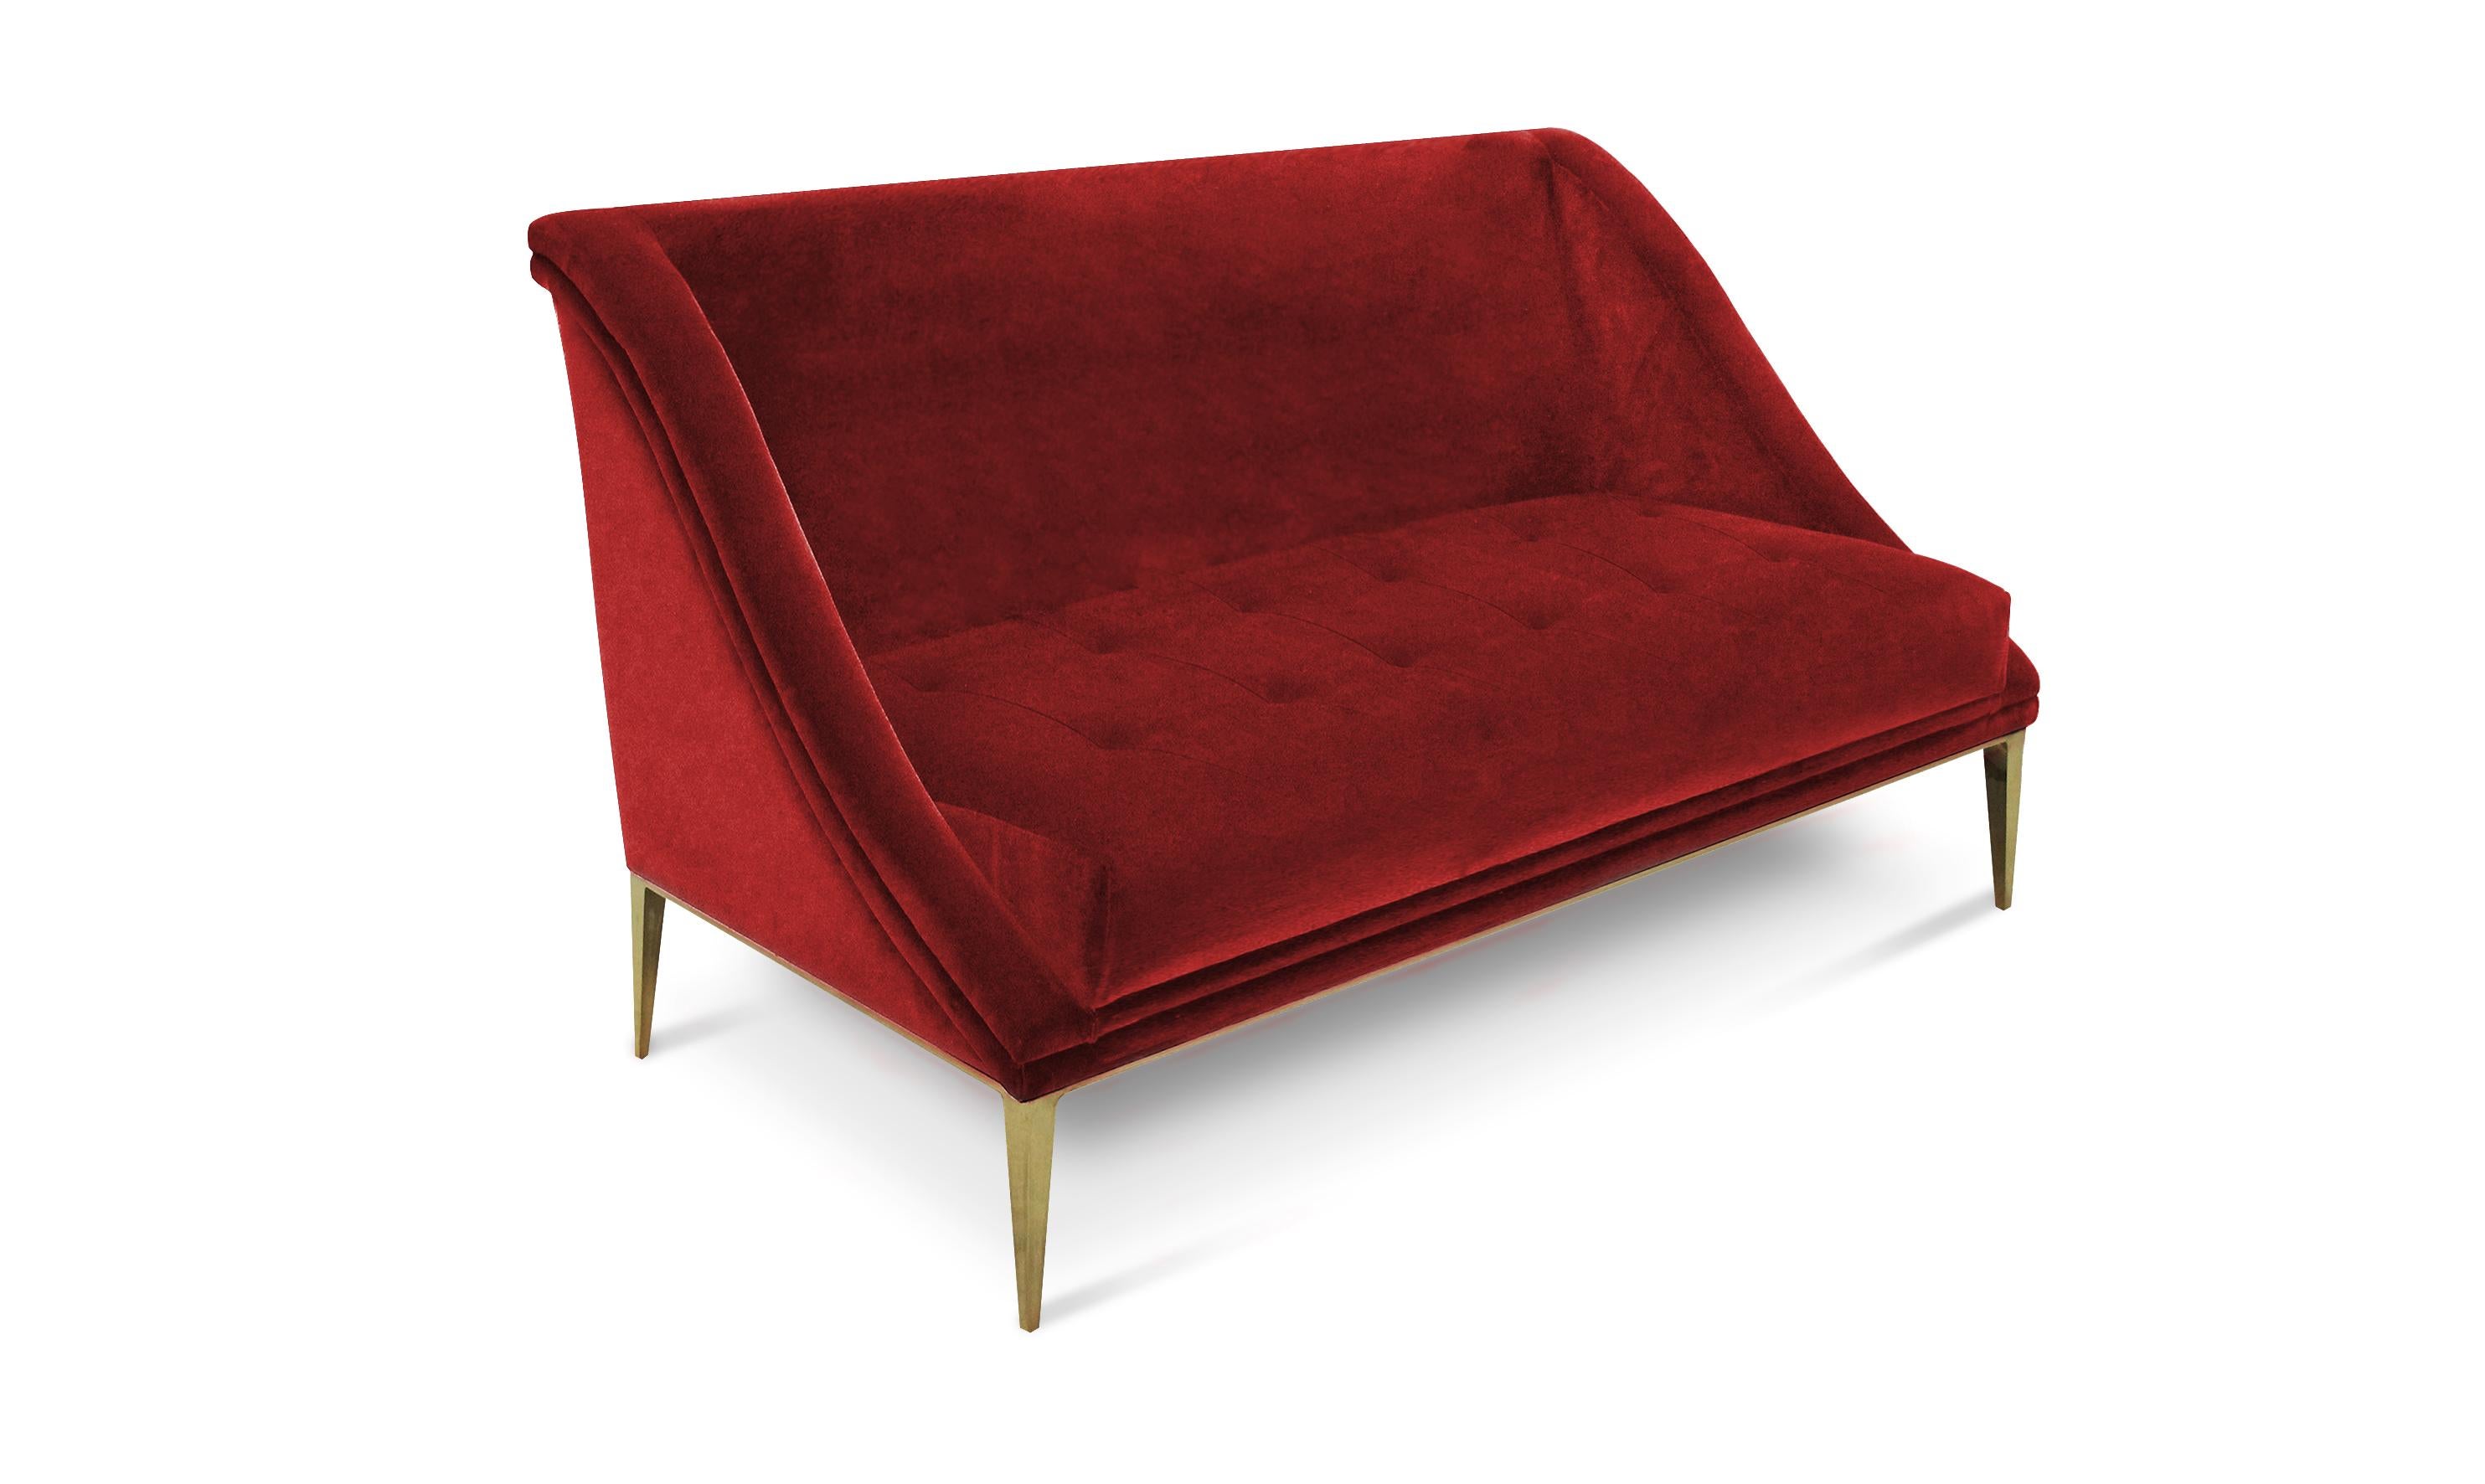 Designed to perform in a matter that indulges the eyes, the Geisha‘s curves grace a room with the extravagance and poise of a Kyoto Geisha. This fully upholstered tight back sofa is wrapped with a chic metal band leading to modern and sleek metal